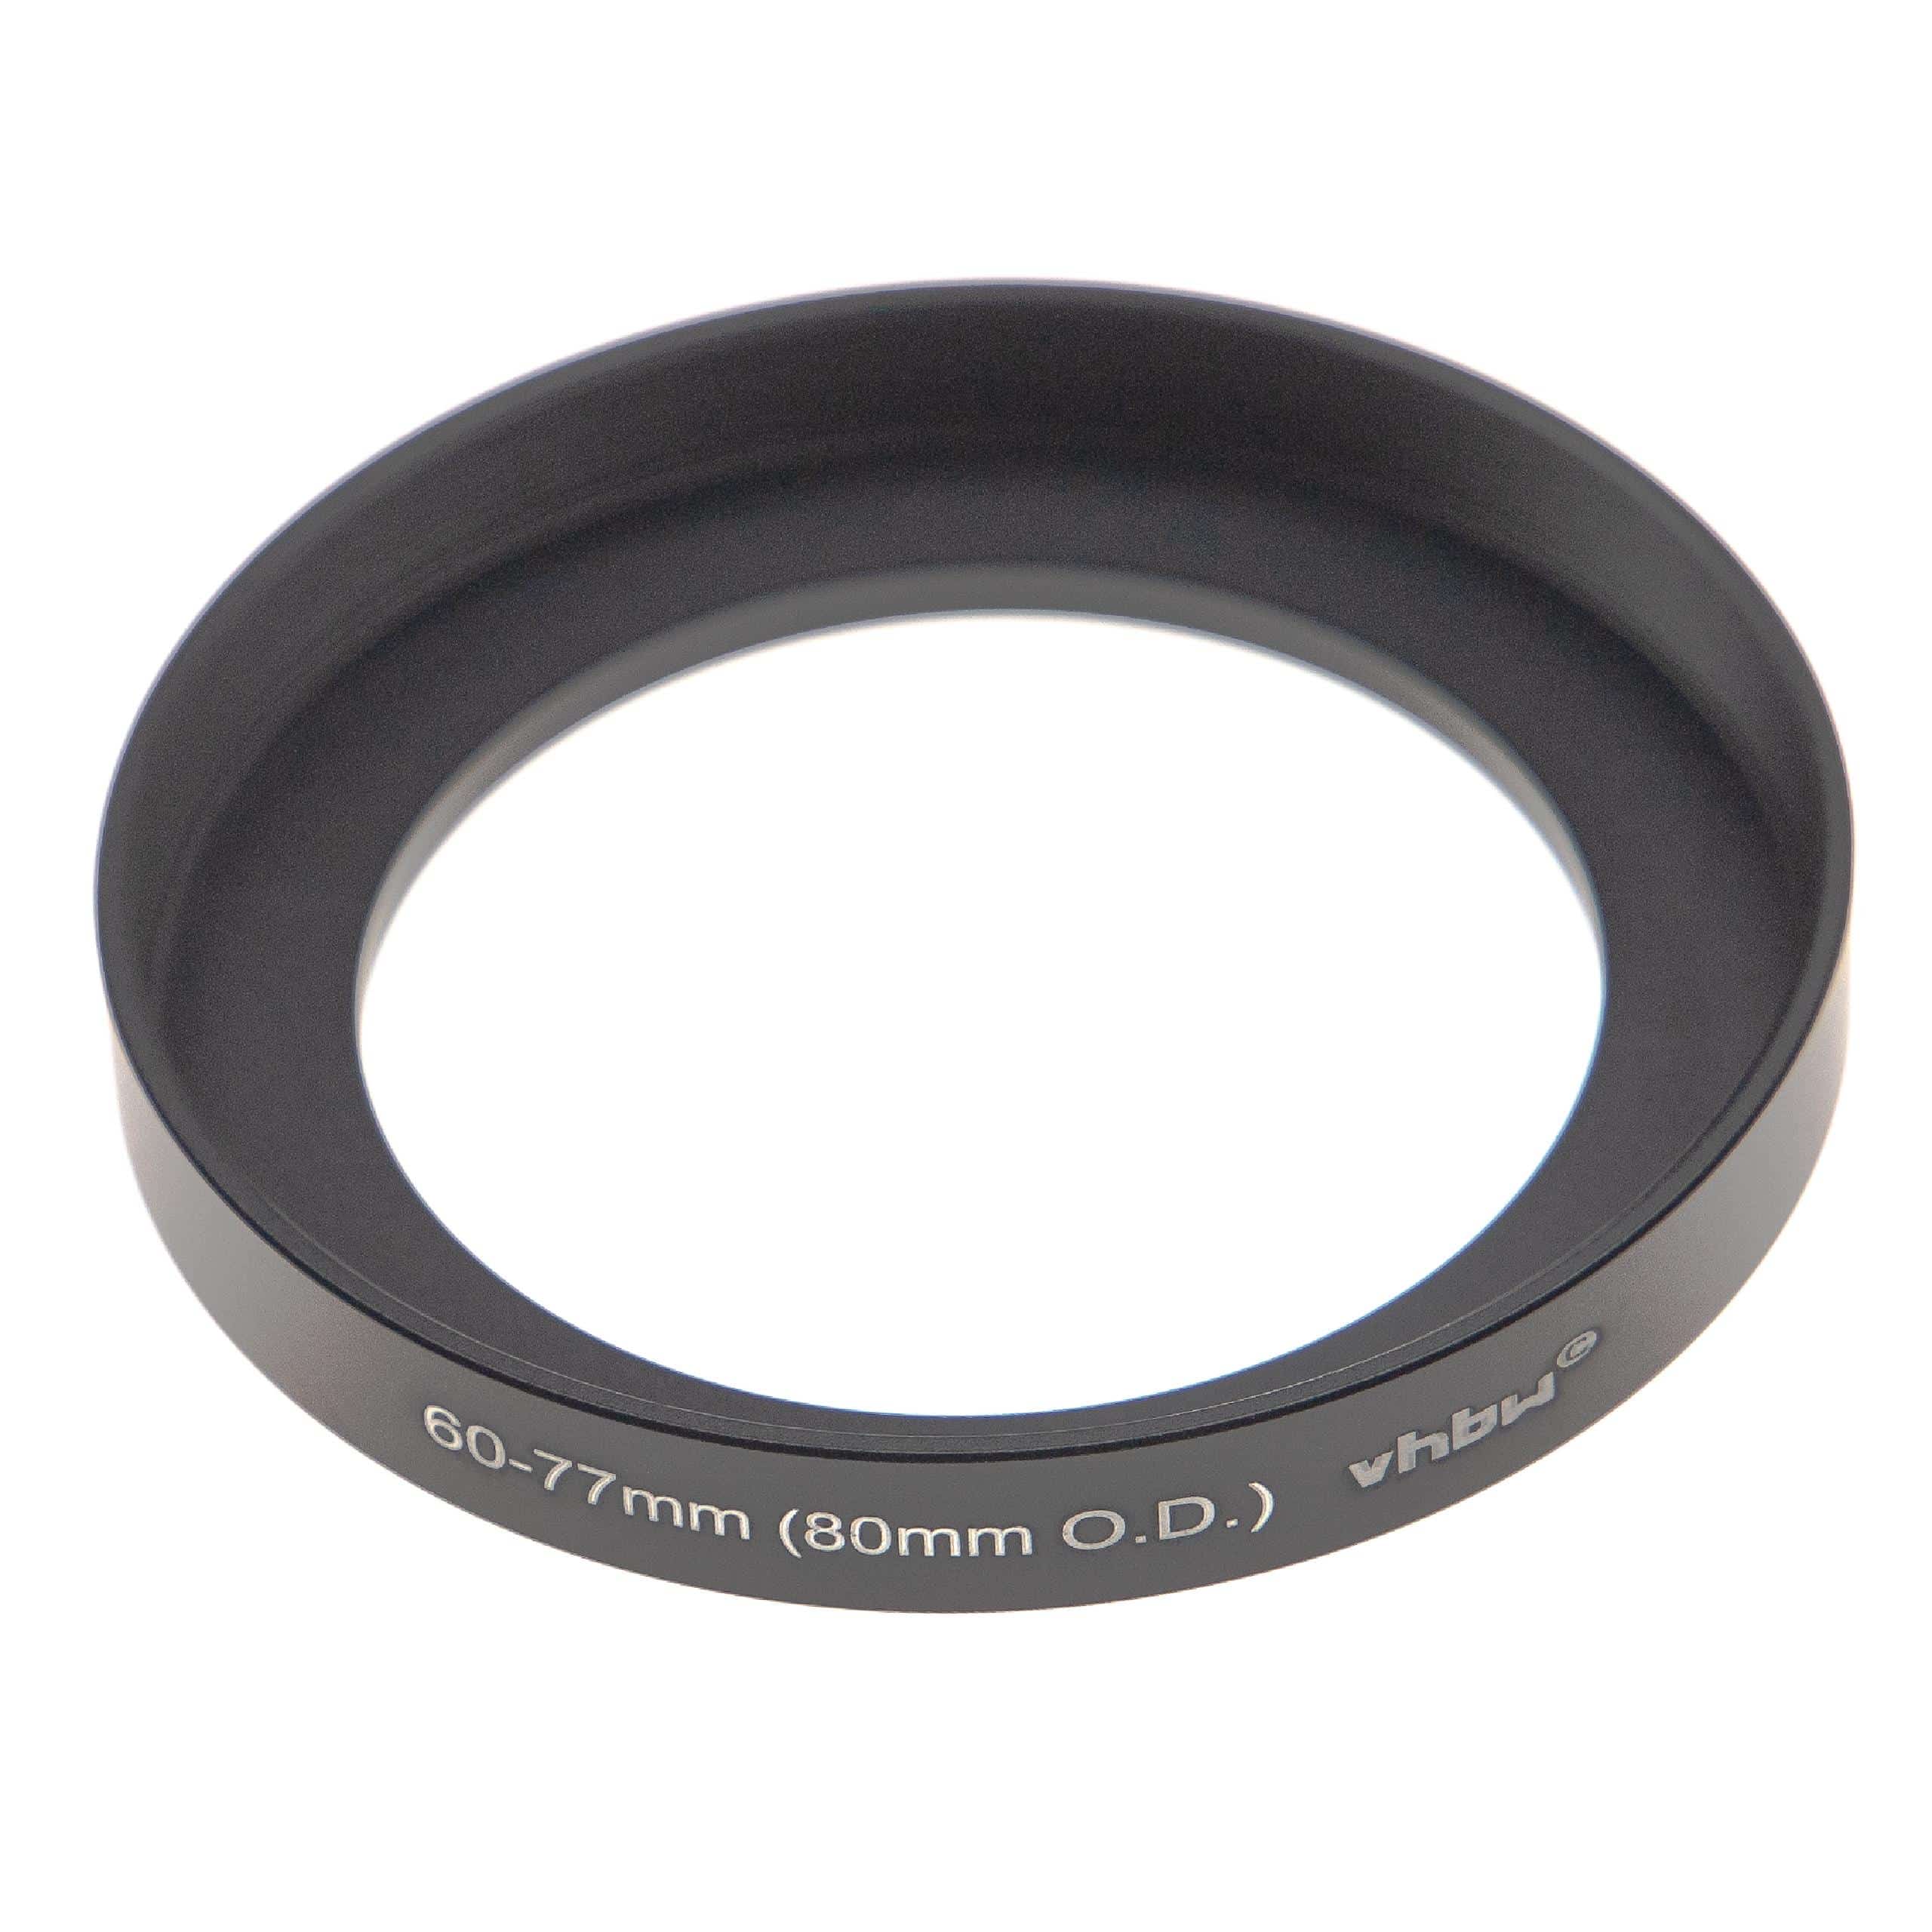 Step-Up Ring Adapter of 60 mm to 77 mm for matte box 80 mm O.D. - Filter Adapter